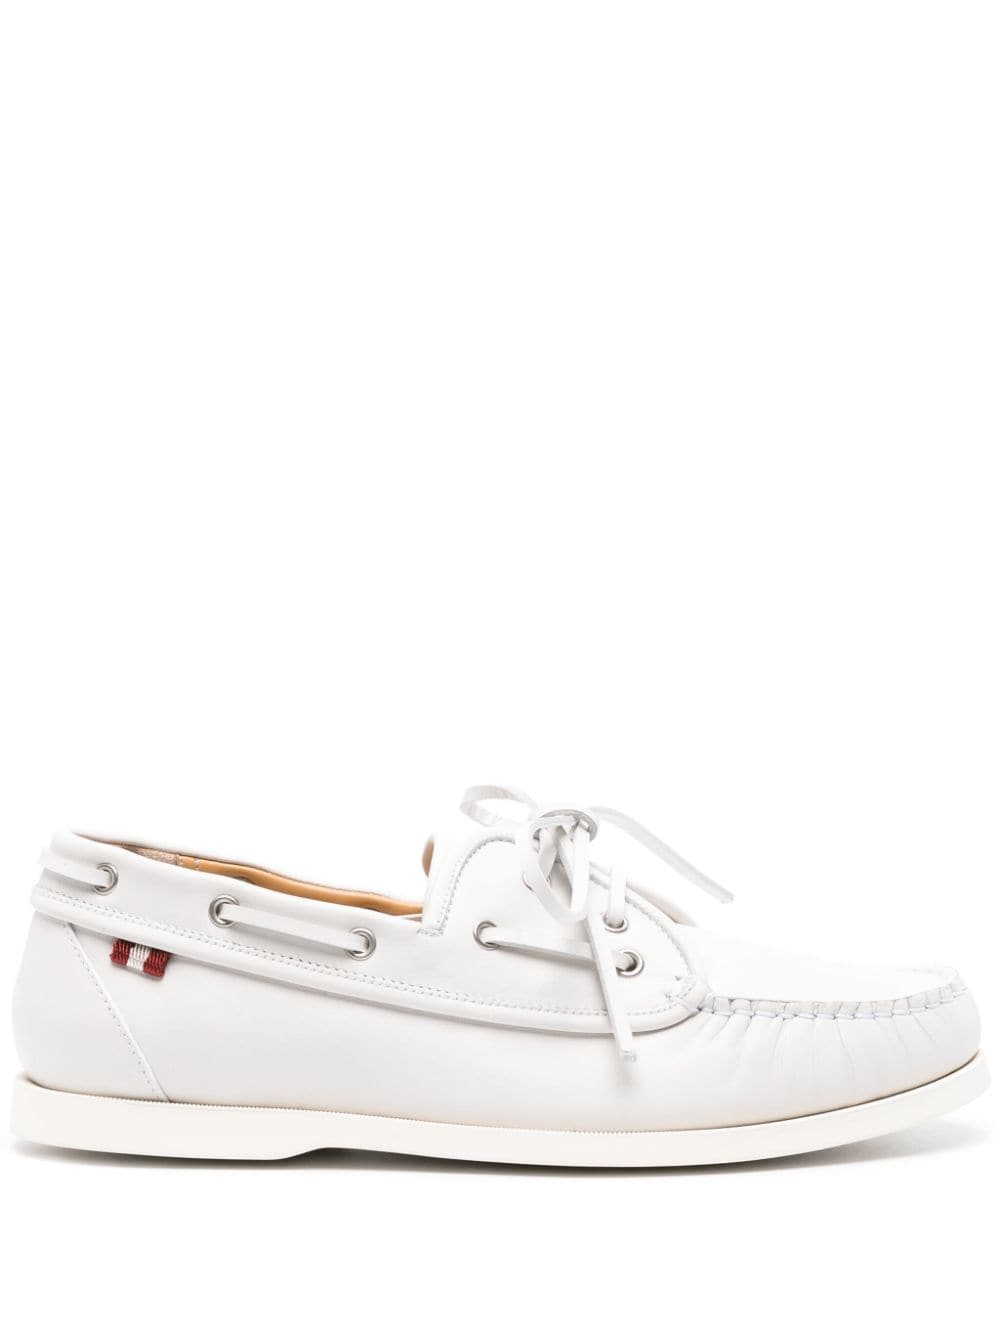 Bally Nabry Leather Boat Shoes In White